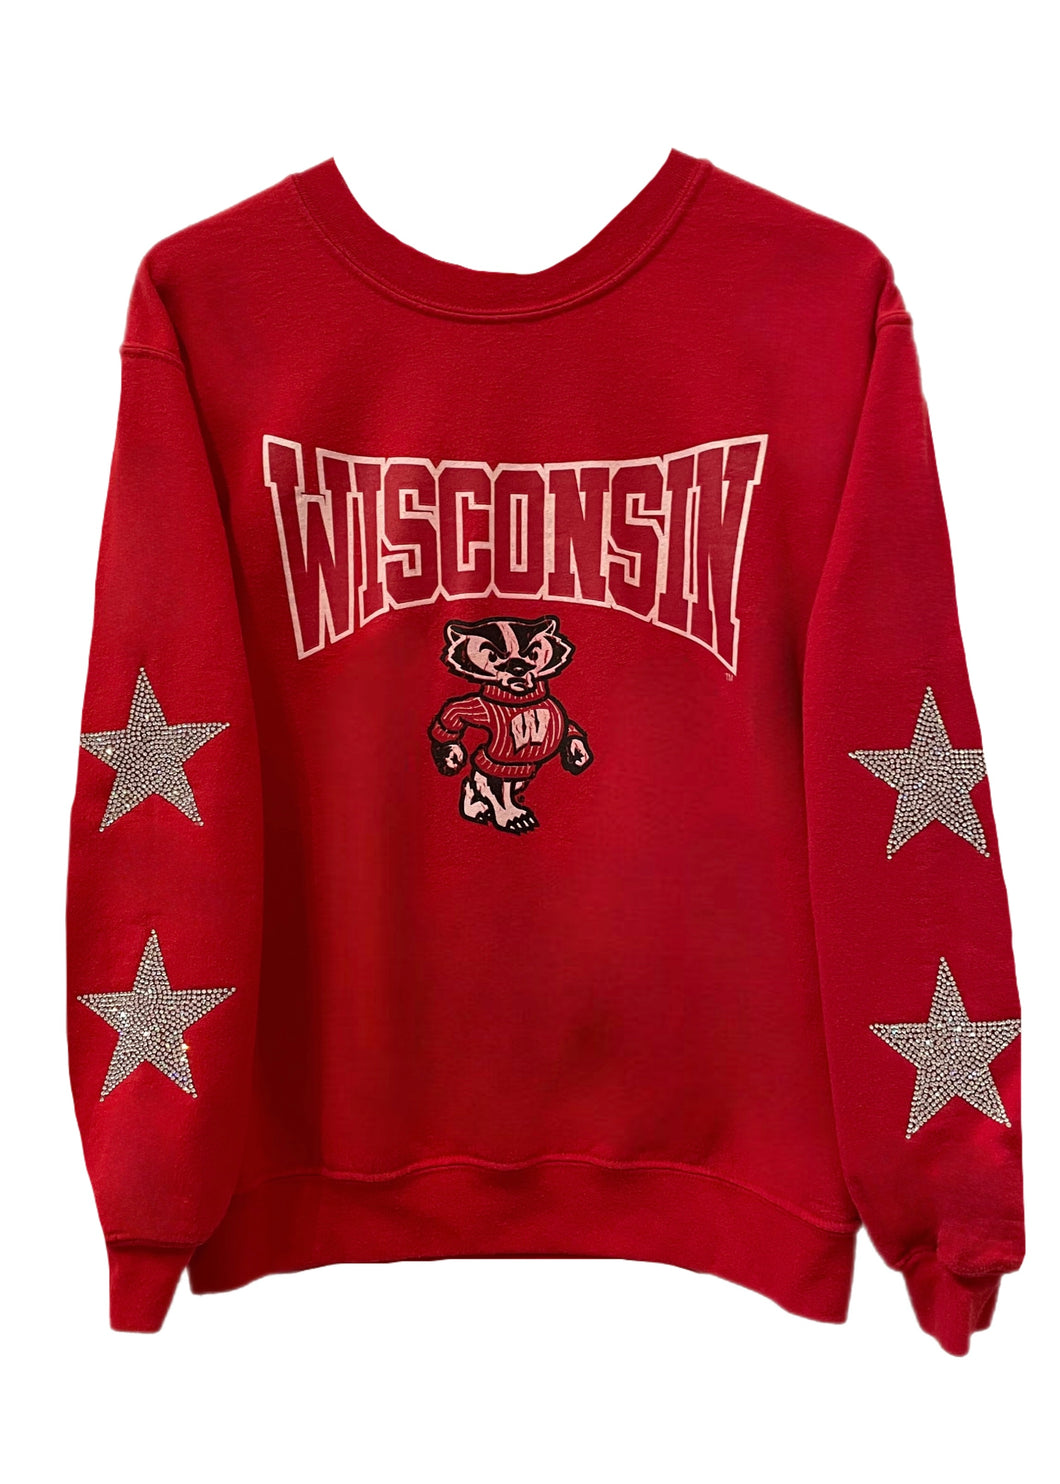 University of Wisconsin, Badgers One of a KIND Vintage Sweatshirt with Crystal Star Design.